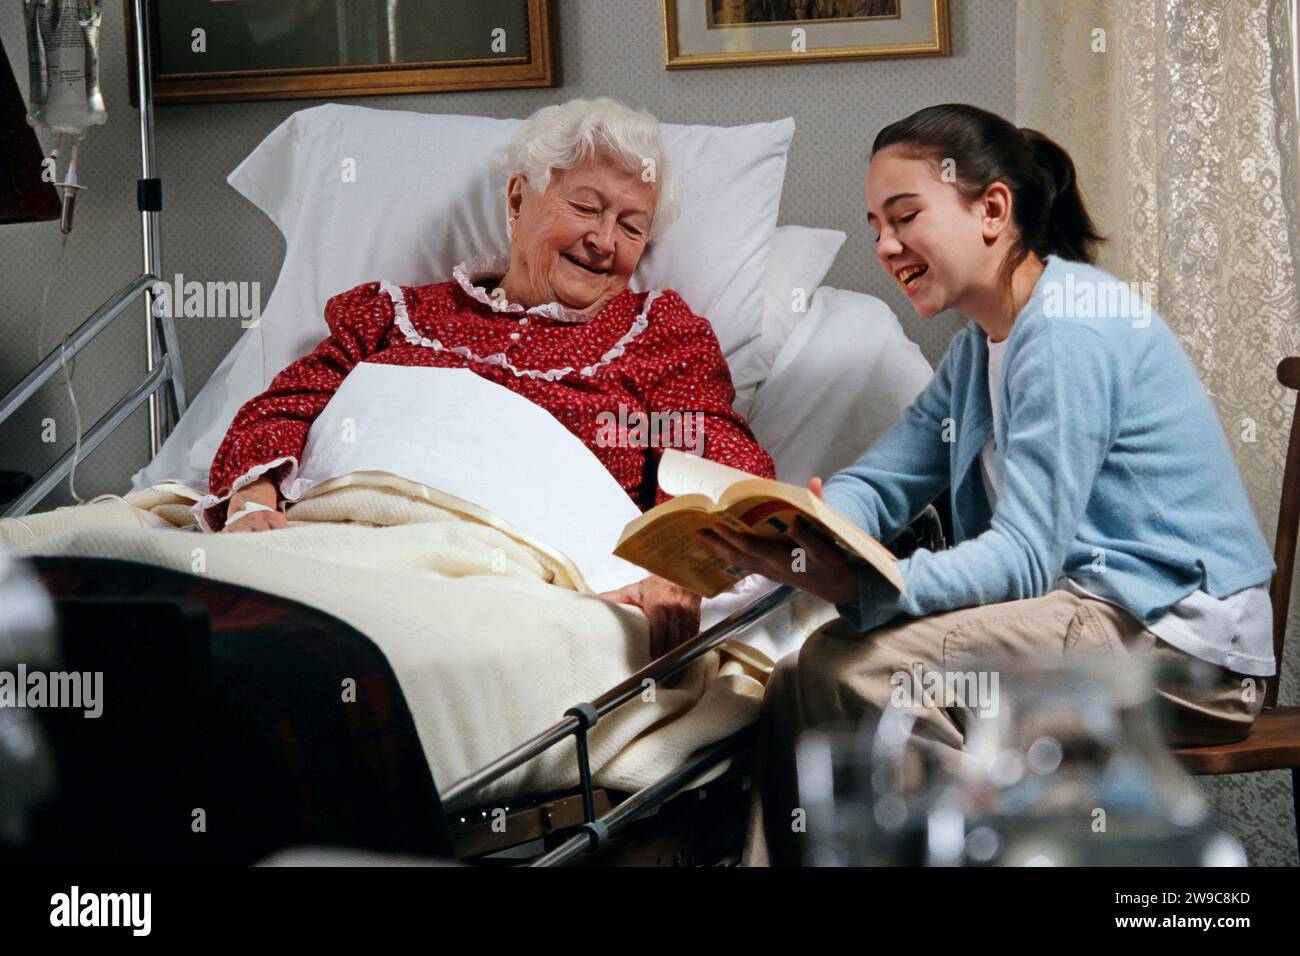 A granddaughter Reading a book to her bed ridden grandmother as she recovers at home from a medical issue Stock Photo